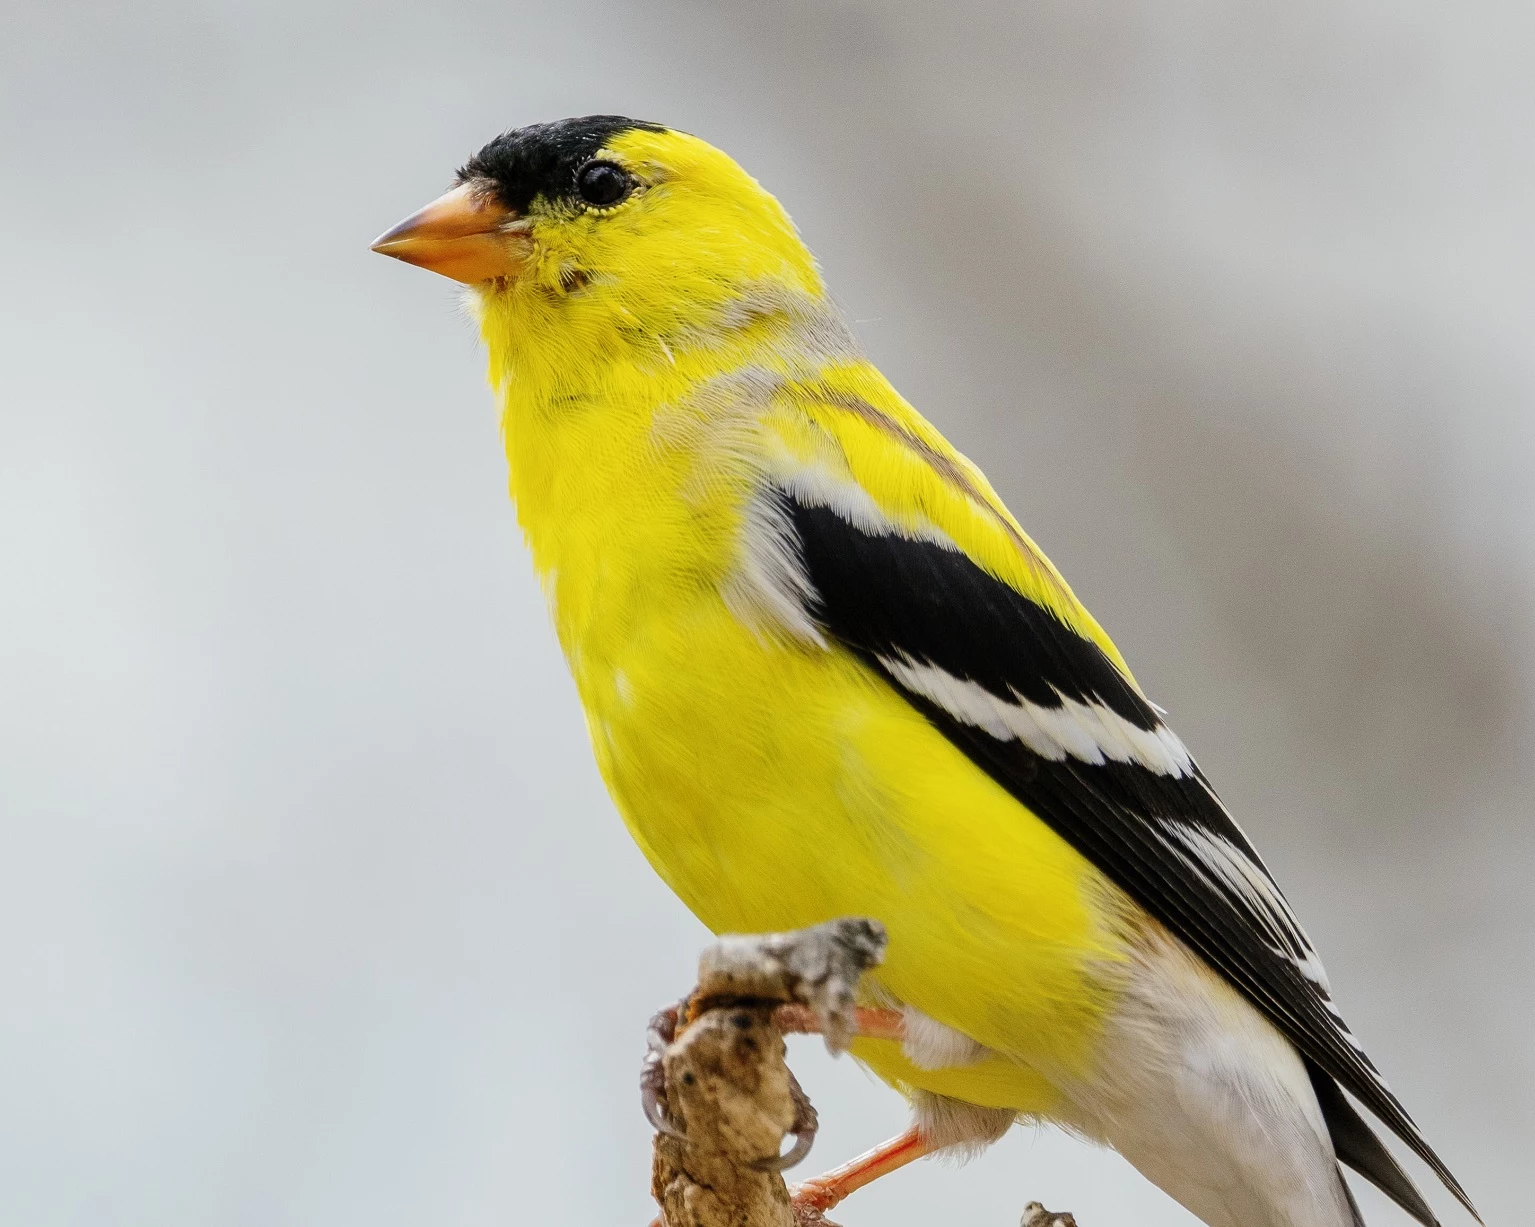 The Most Commonly Seen Bird in NJ is NOT the American Goldfinch